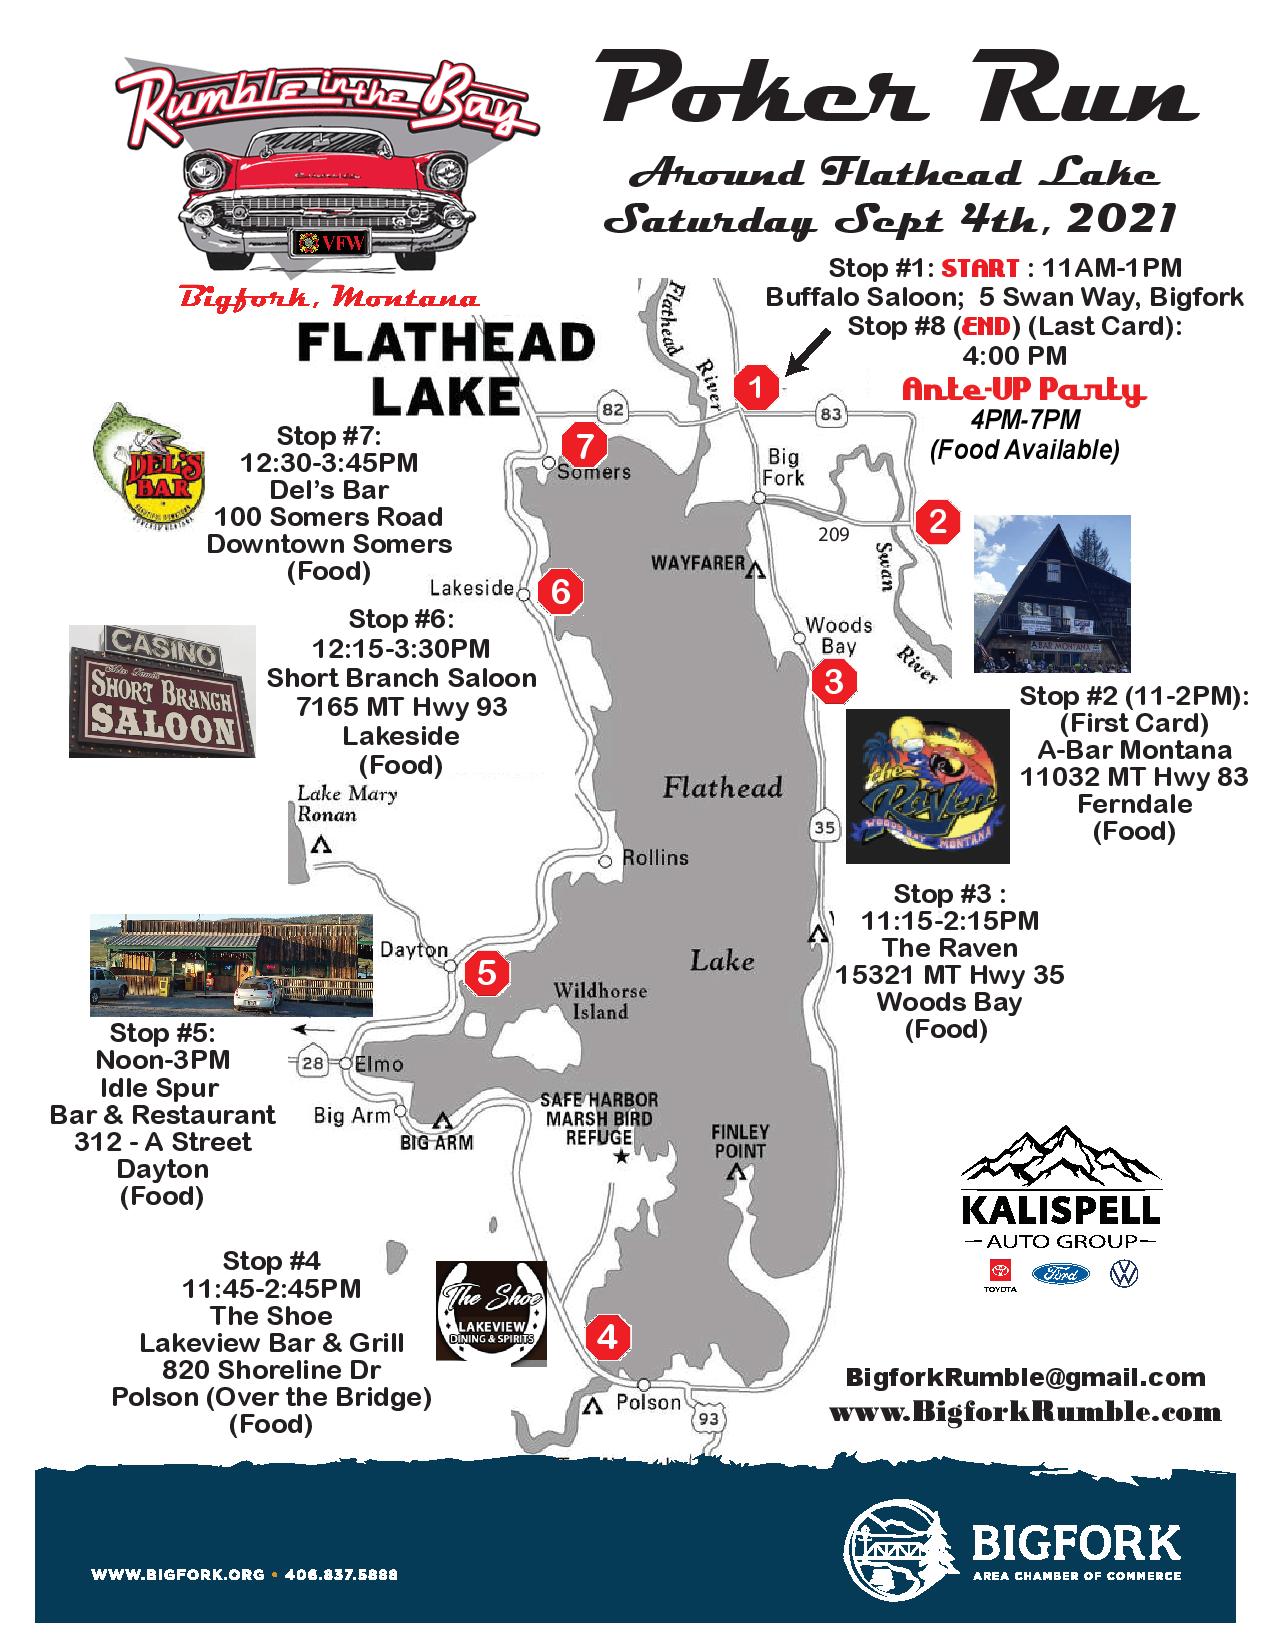 Rumble Around the Lake Poker Run & Ante-Up Party